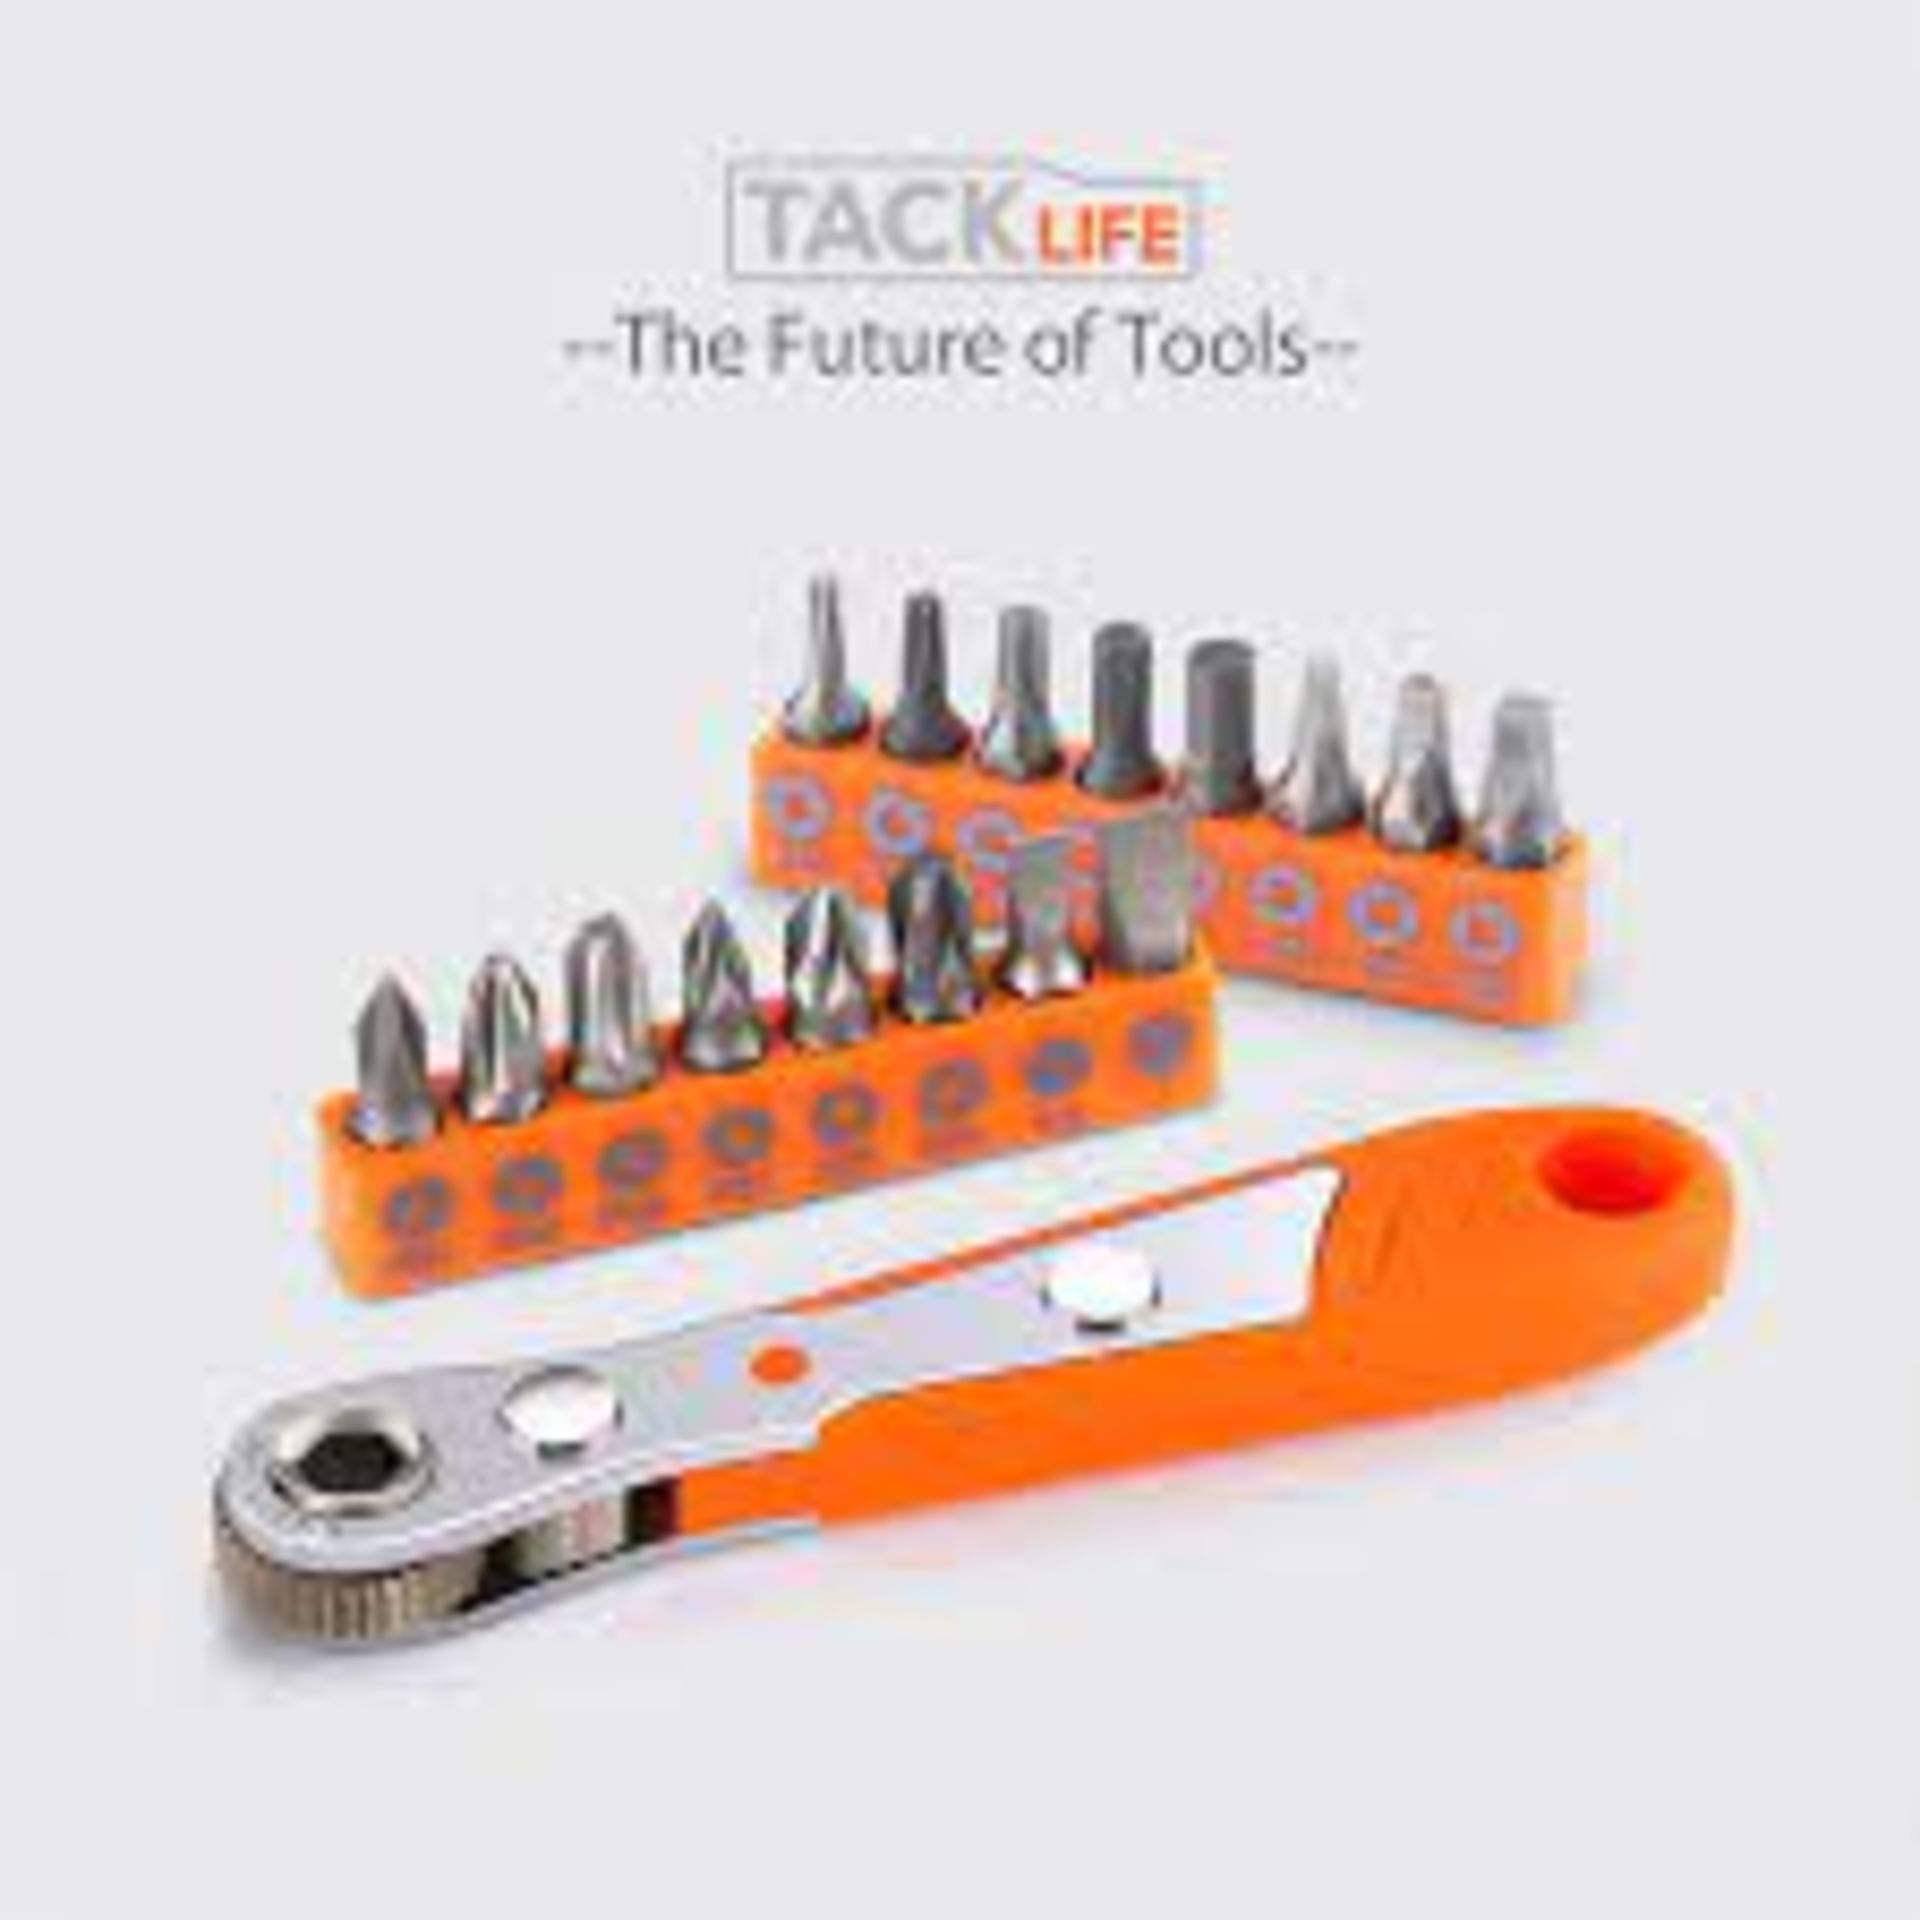 10 X NEW PACKAGED TACKLIFE HRSB1A Ratchet Wrench Set Ratchet Wheel with 36 Teeth Reversible Training